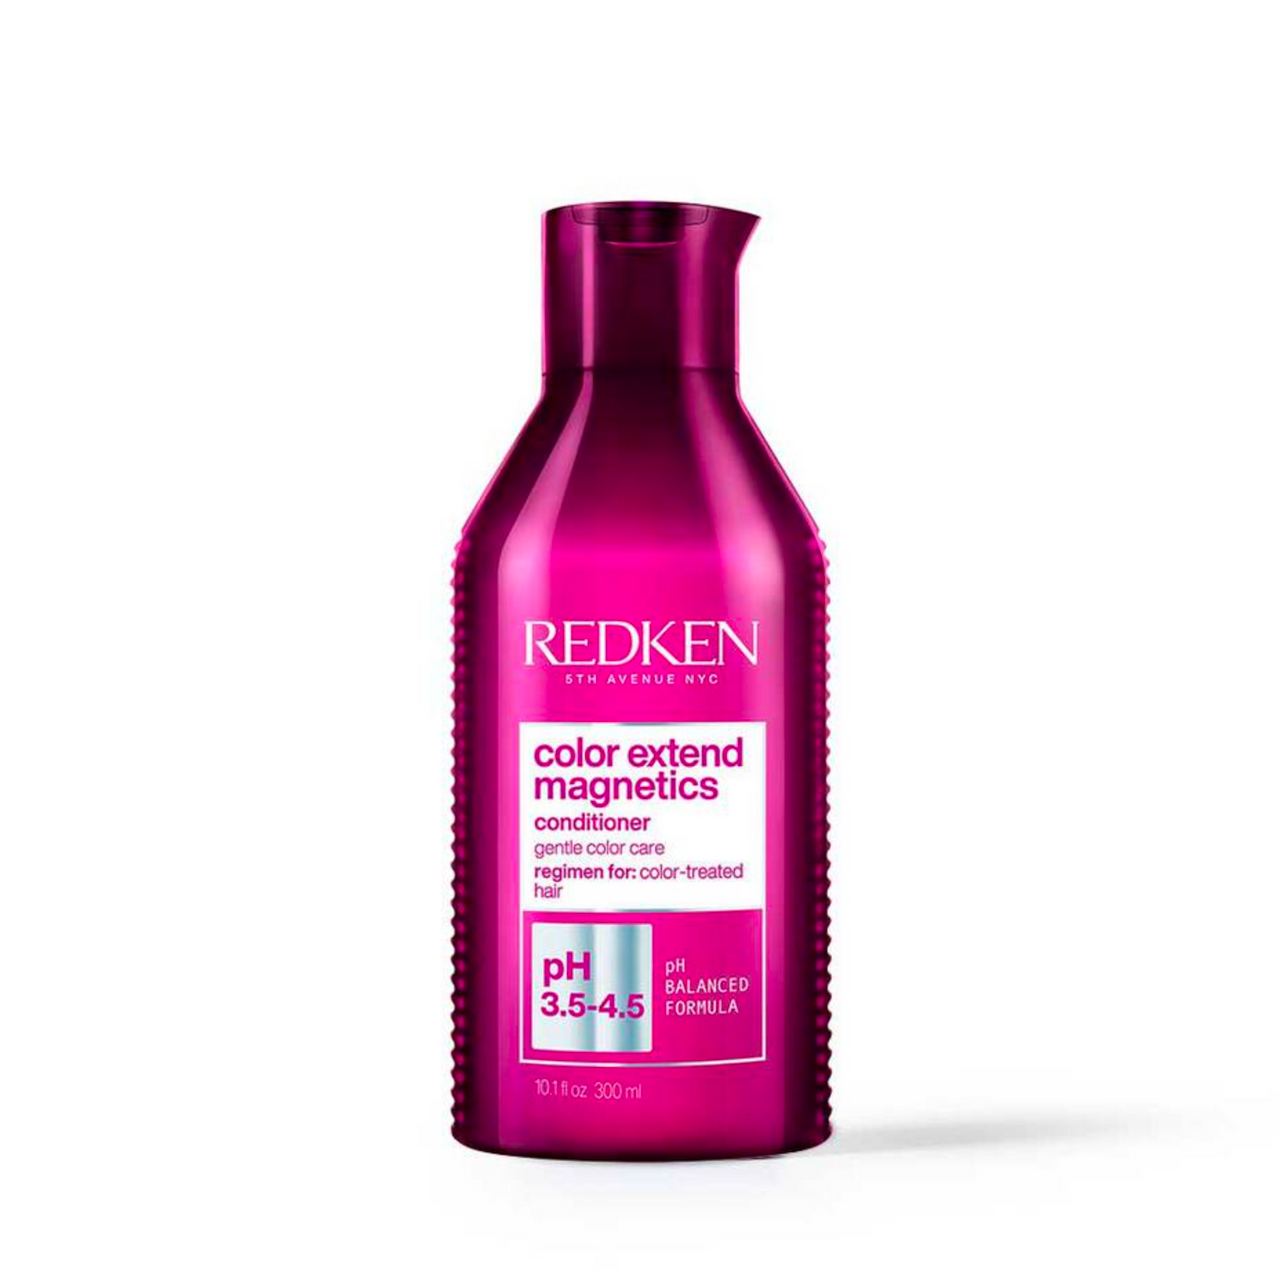 Redken Color Extend Magnetics Conditioner new packaging 